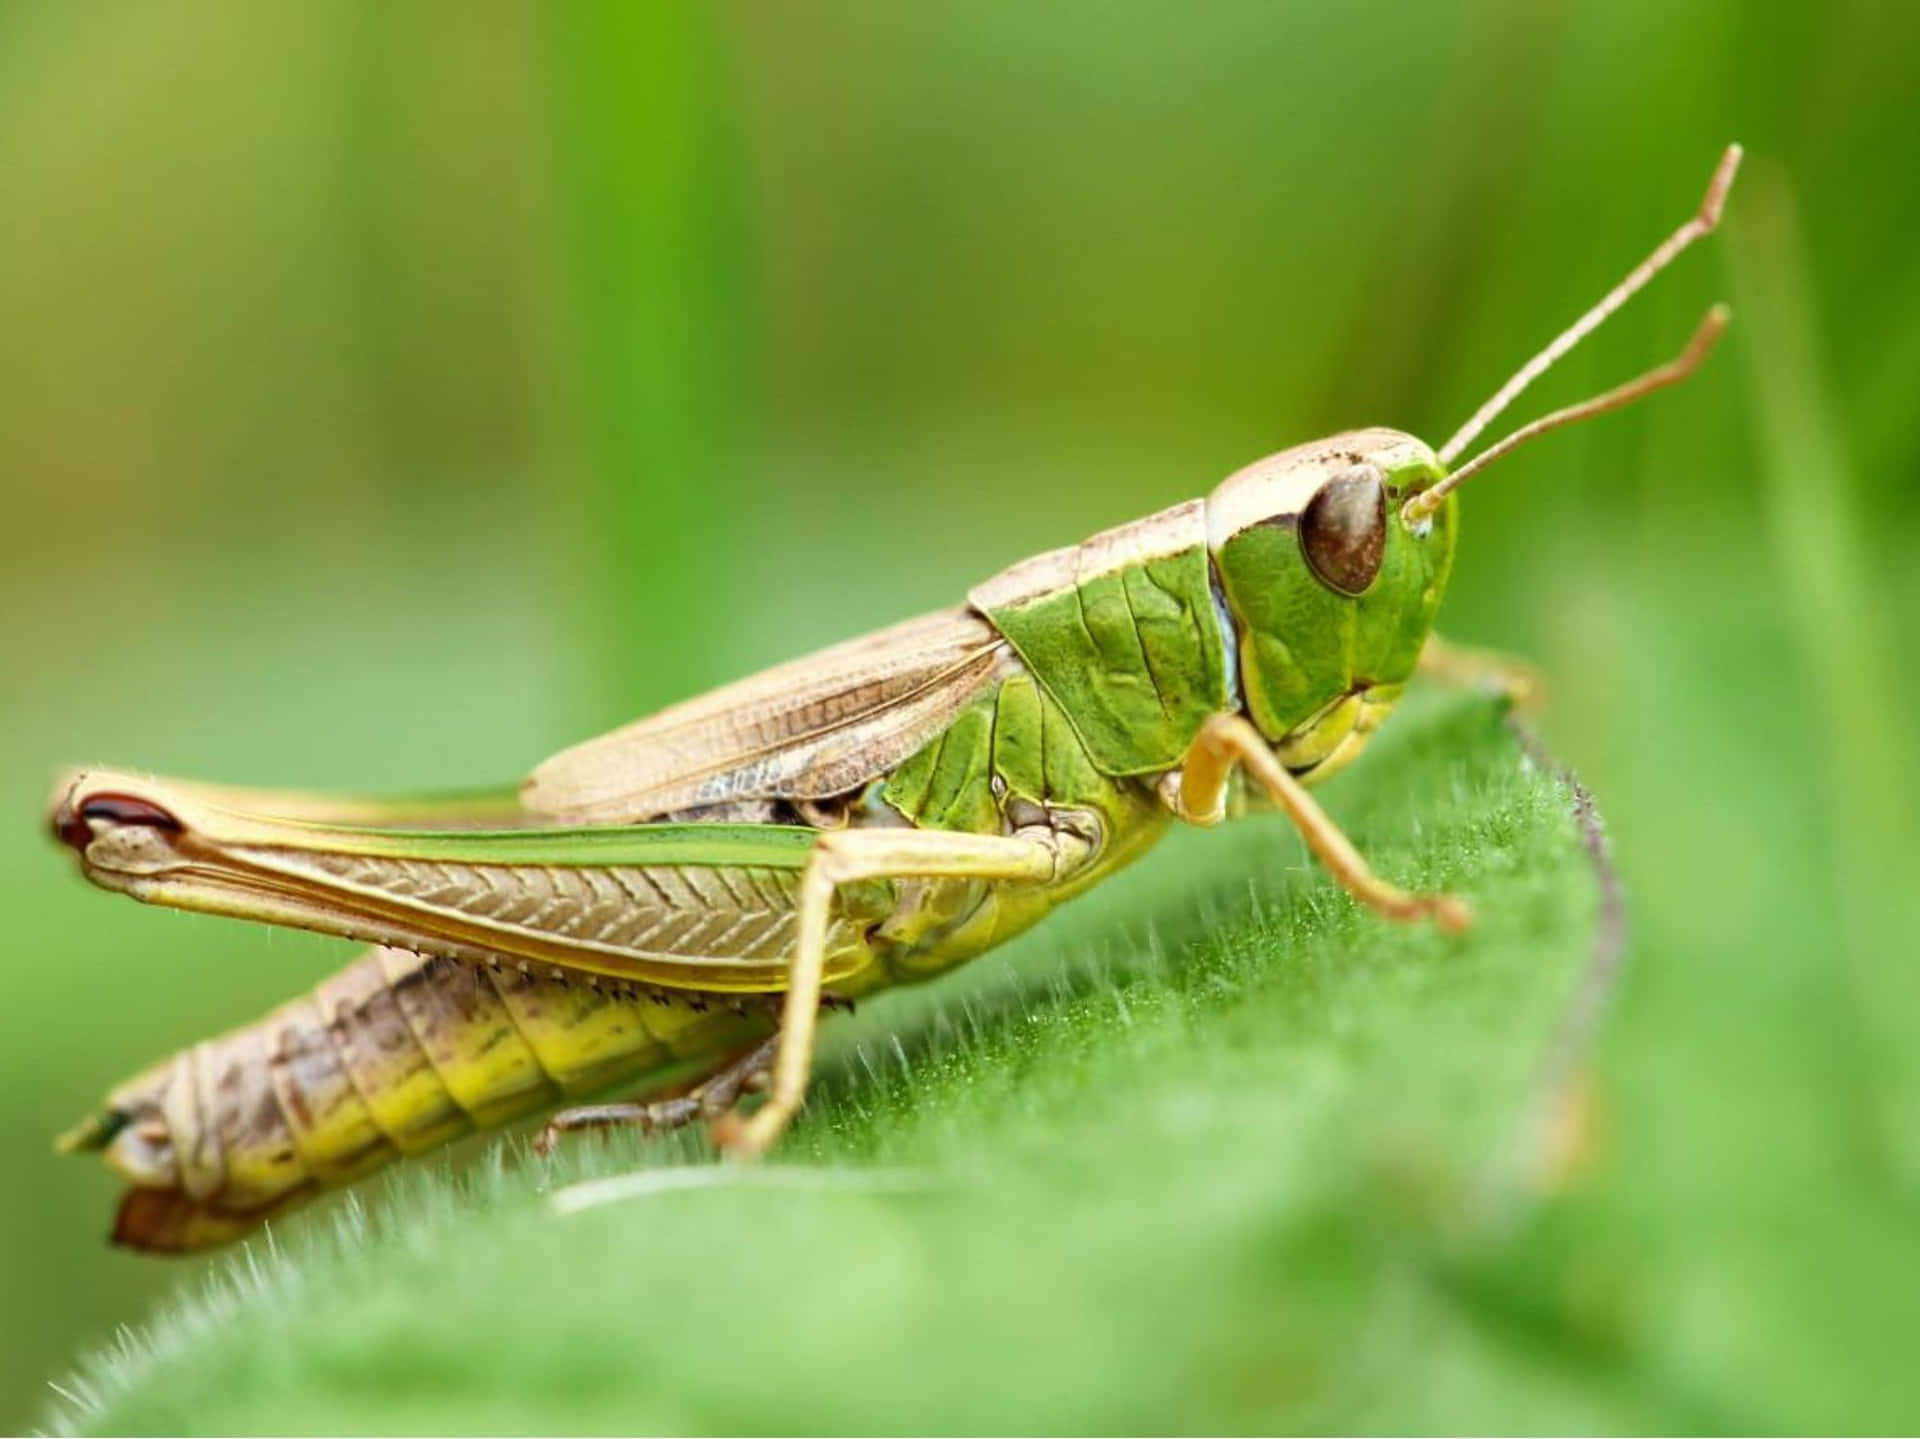 Close-up of a Vivid Green Grasshopper Perched on a Leaf